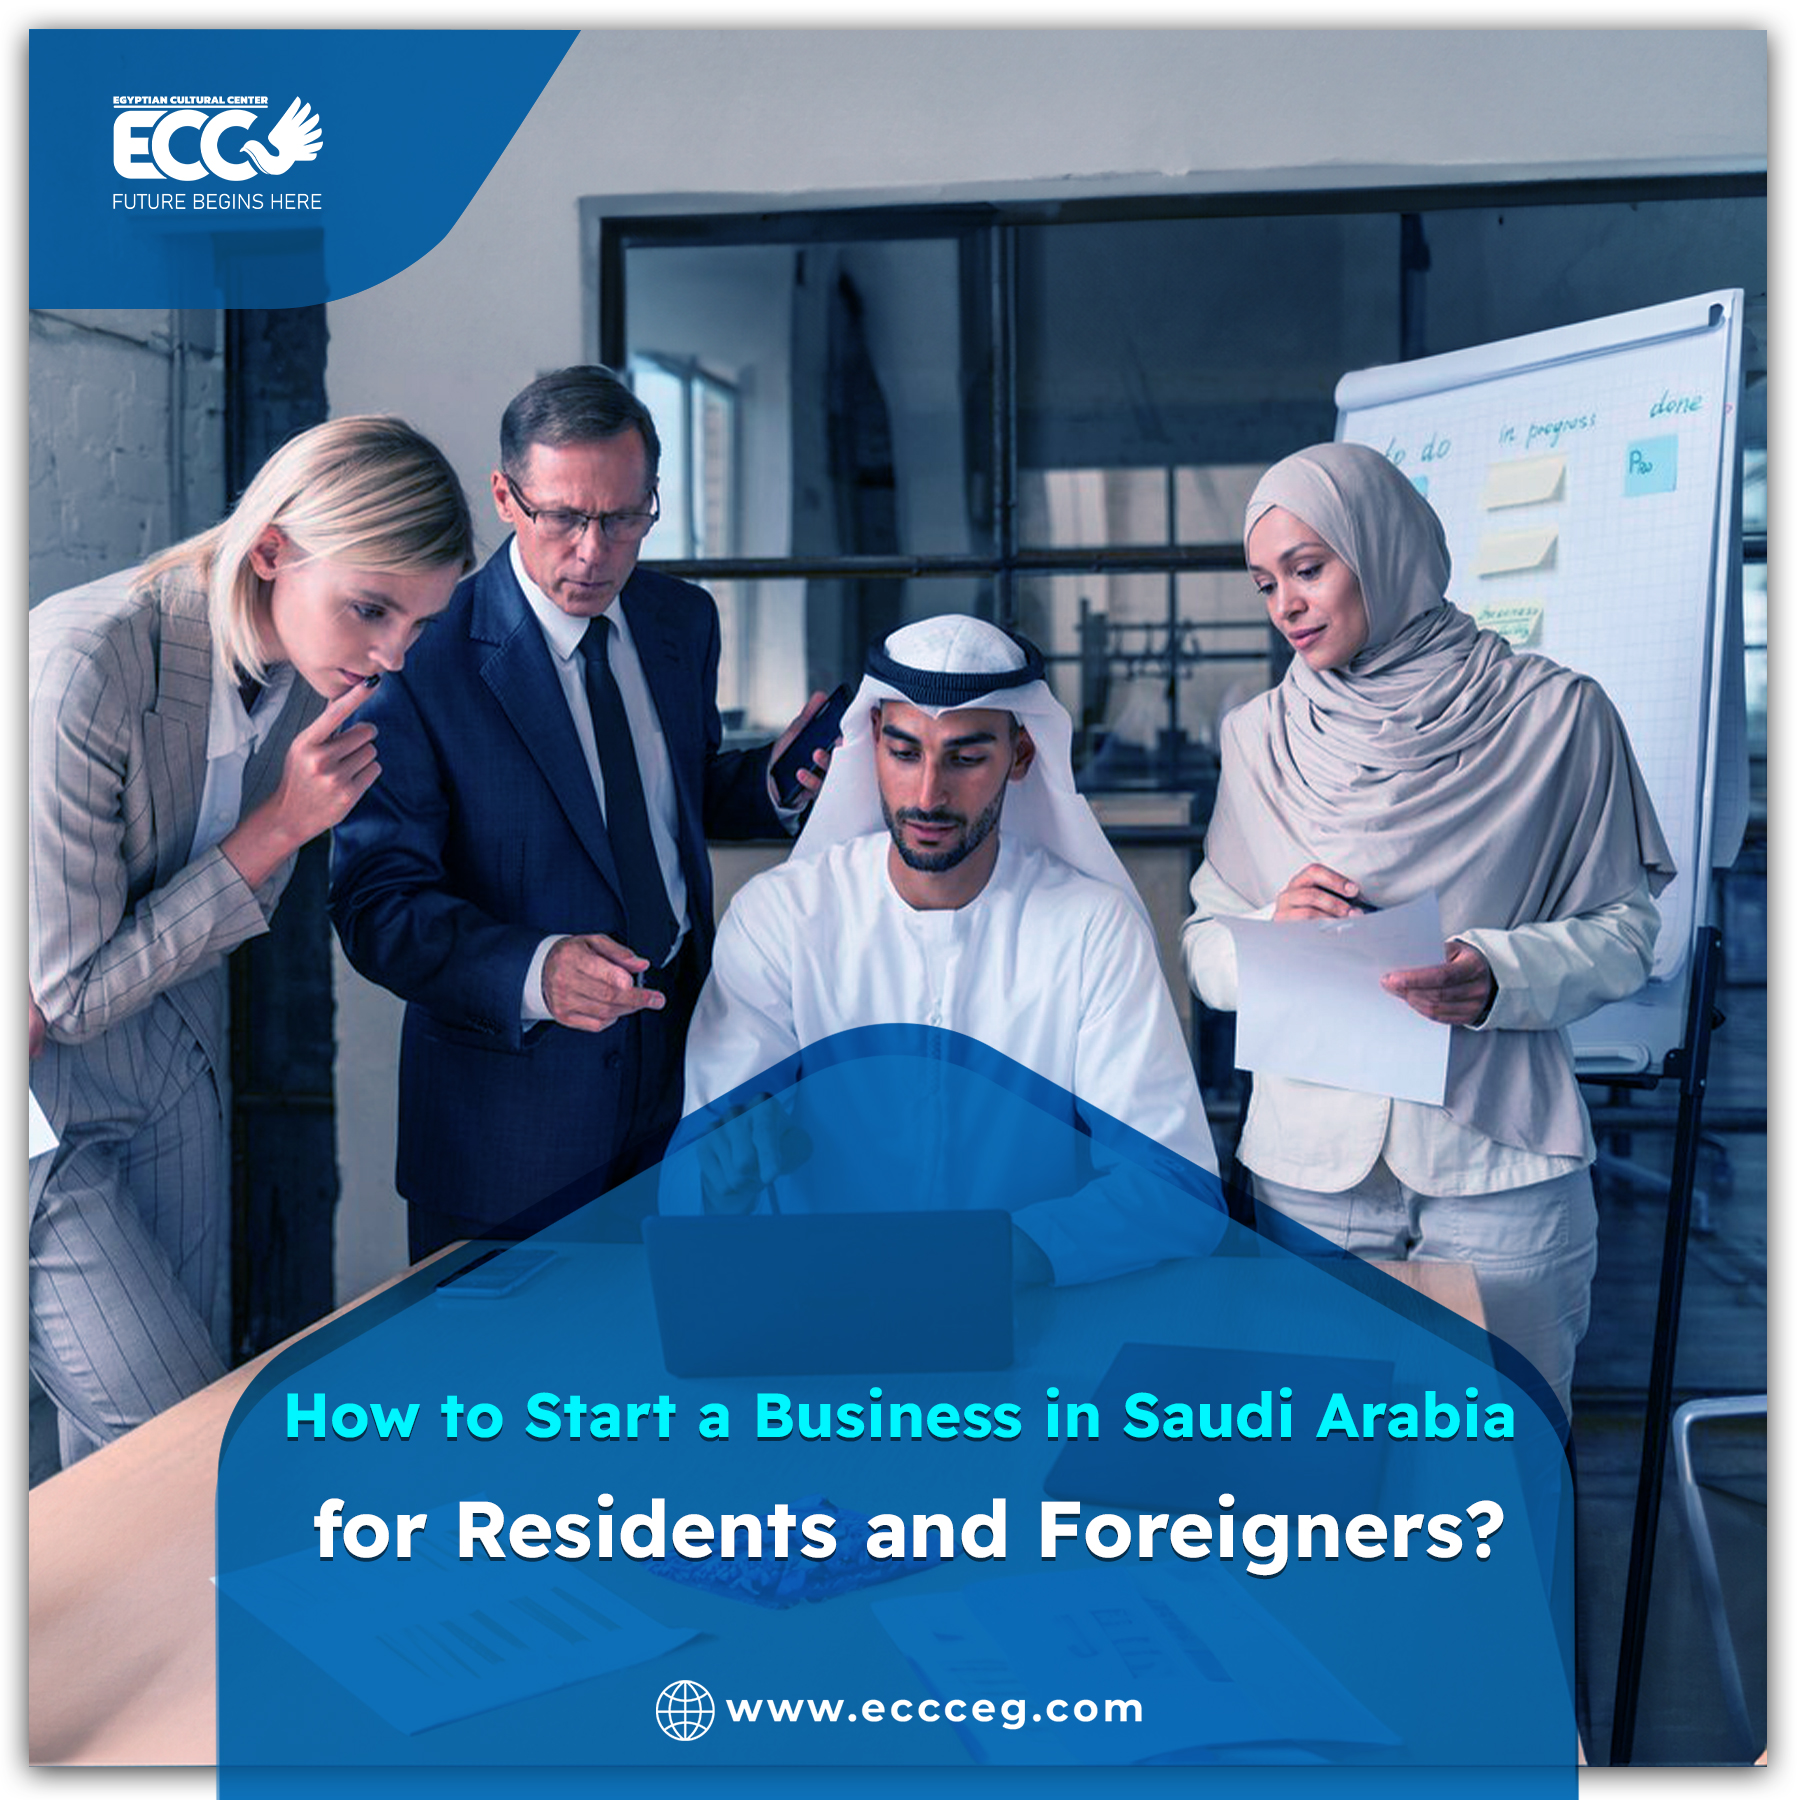 How to Start a Business in Saudi Arabia for Residents and Foreigners?